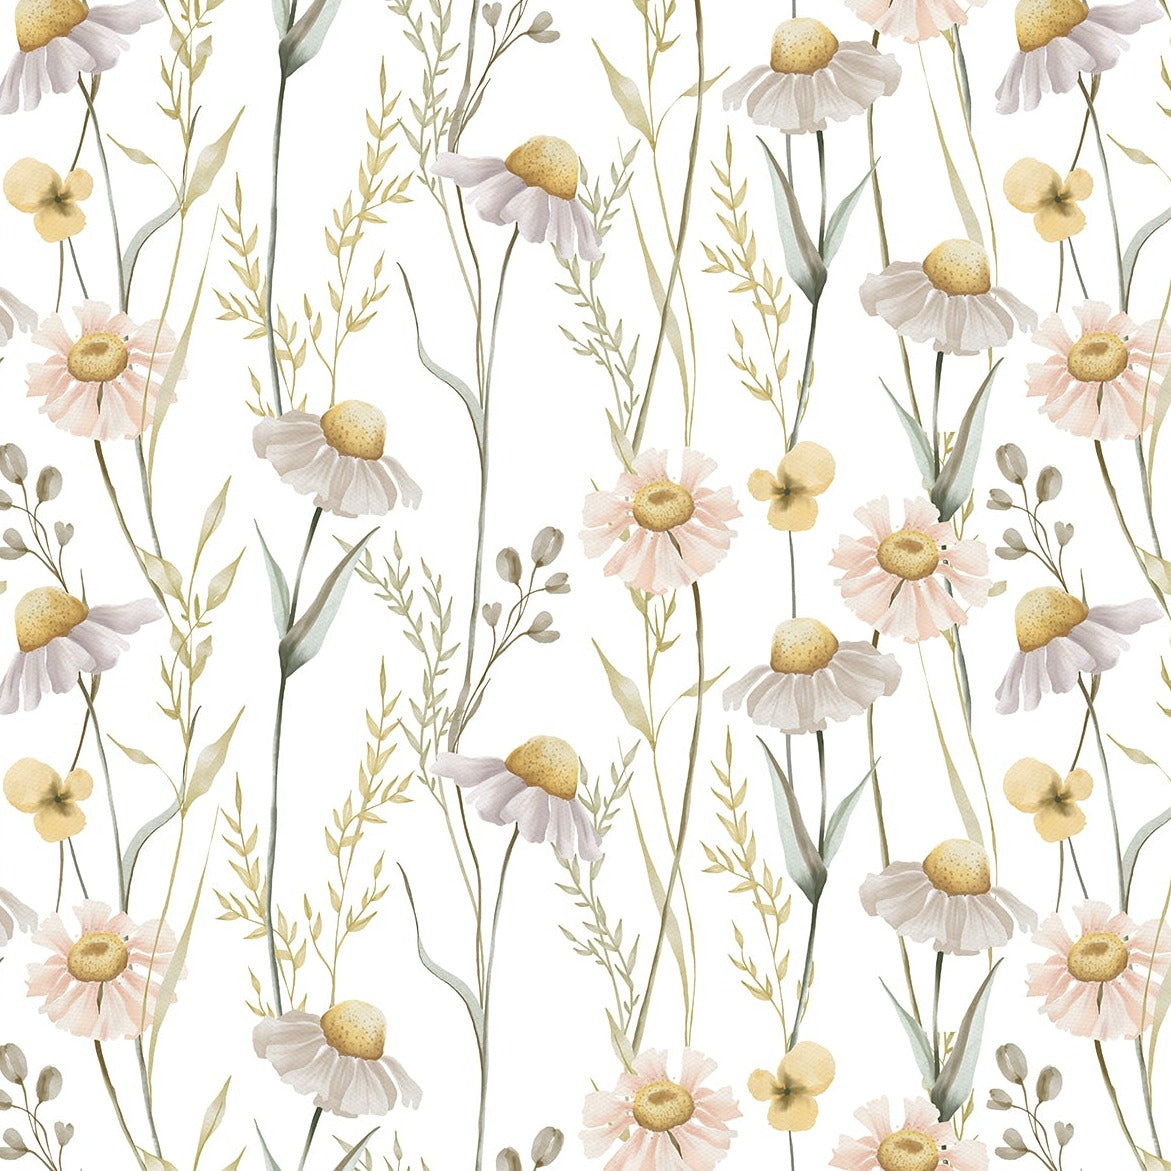 A close-up view of the Watercolour Daisy Wallpaper reveals the soft brushstrokes and gentle hues of the watercolour daisies and foliage, creating a dreamy and romantic floral scene.